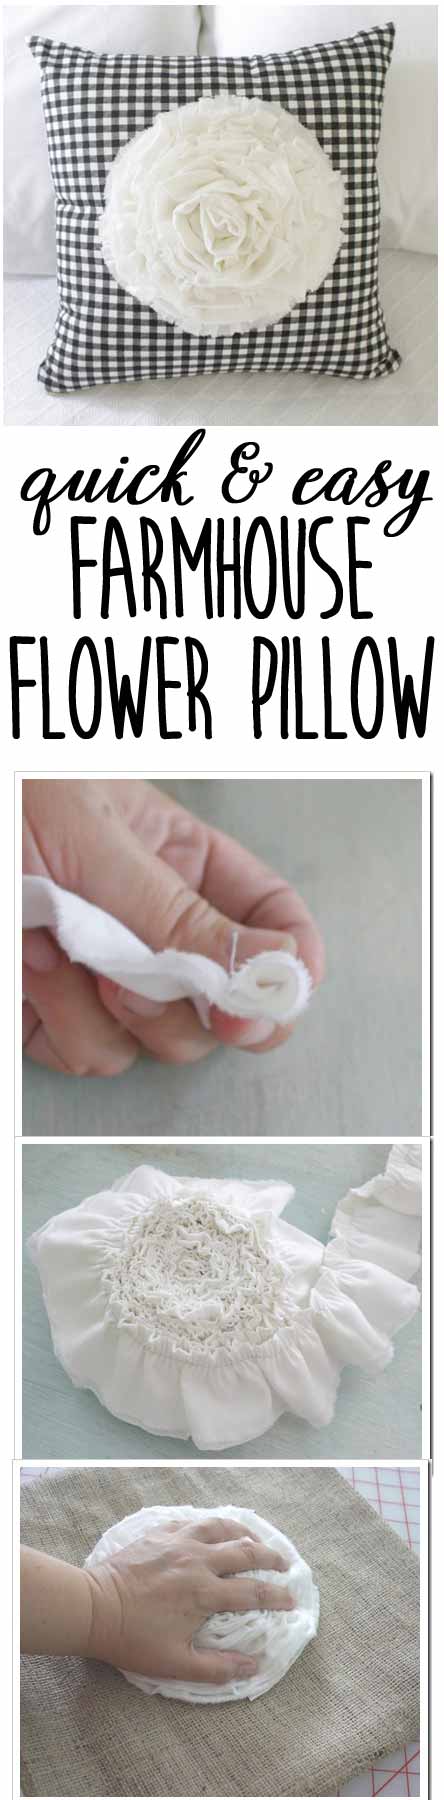 How to make the farmhouse inspired flower pillow